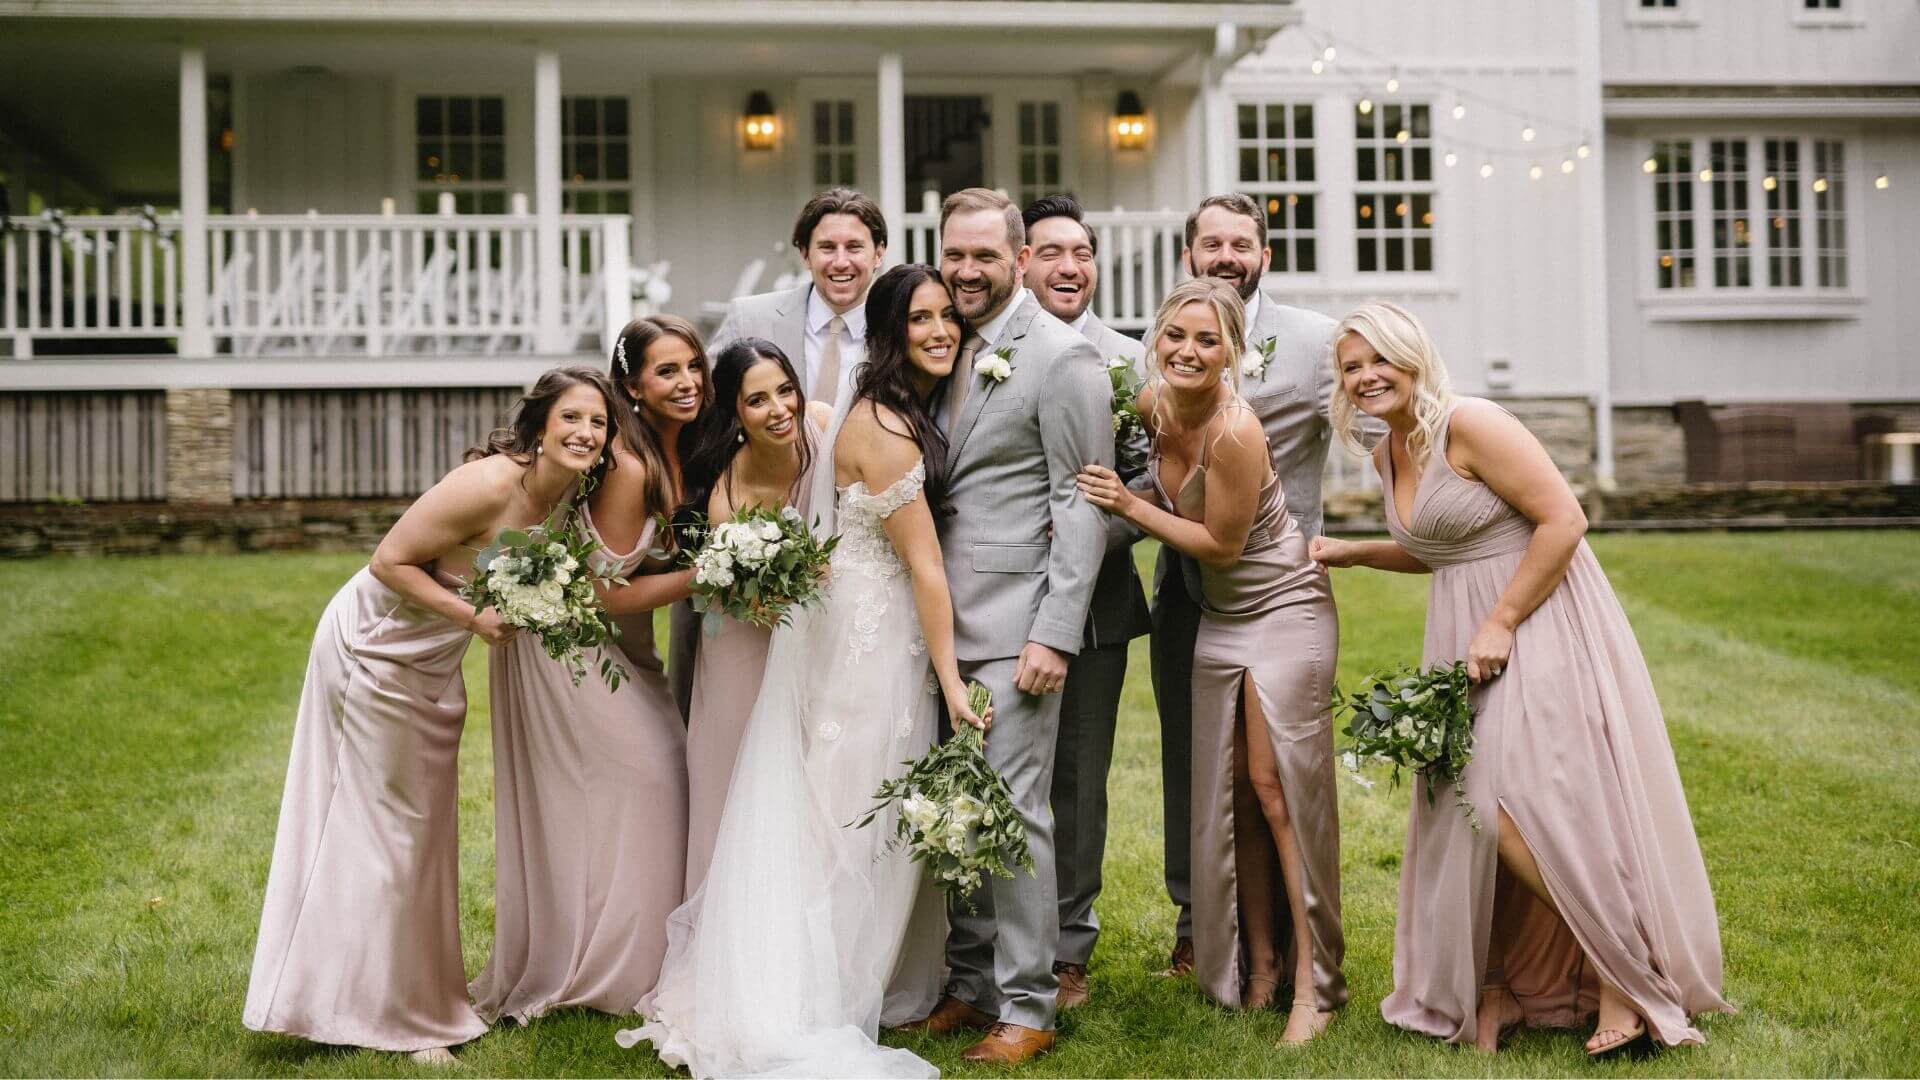 A bride and groom and their wedding party huddled together for a photo on the lawn in front of a large white home